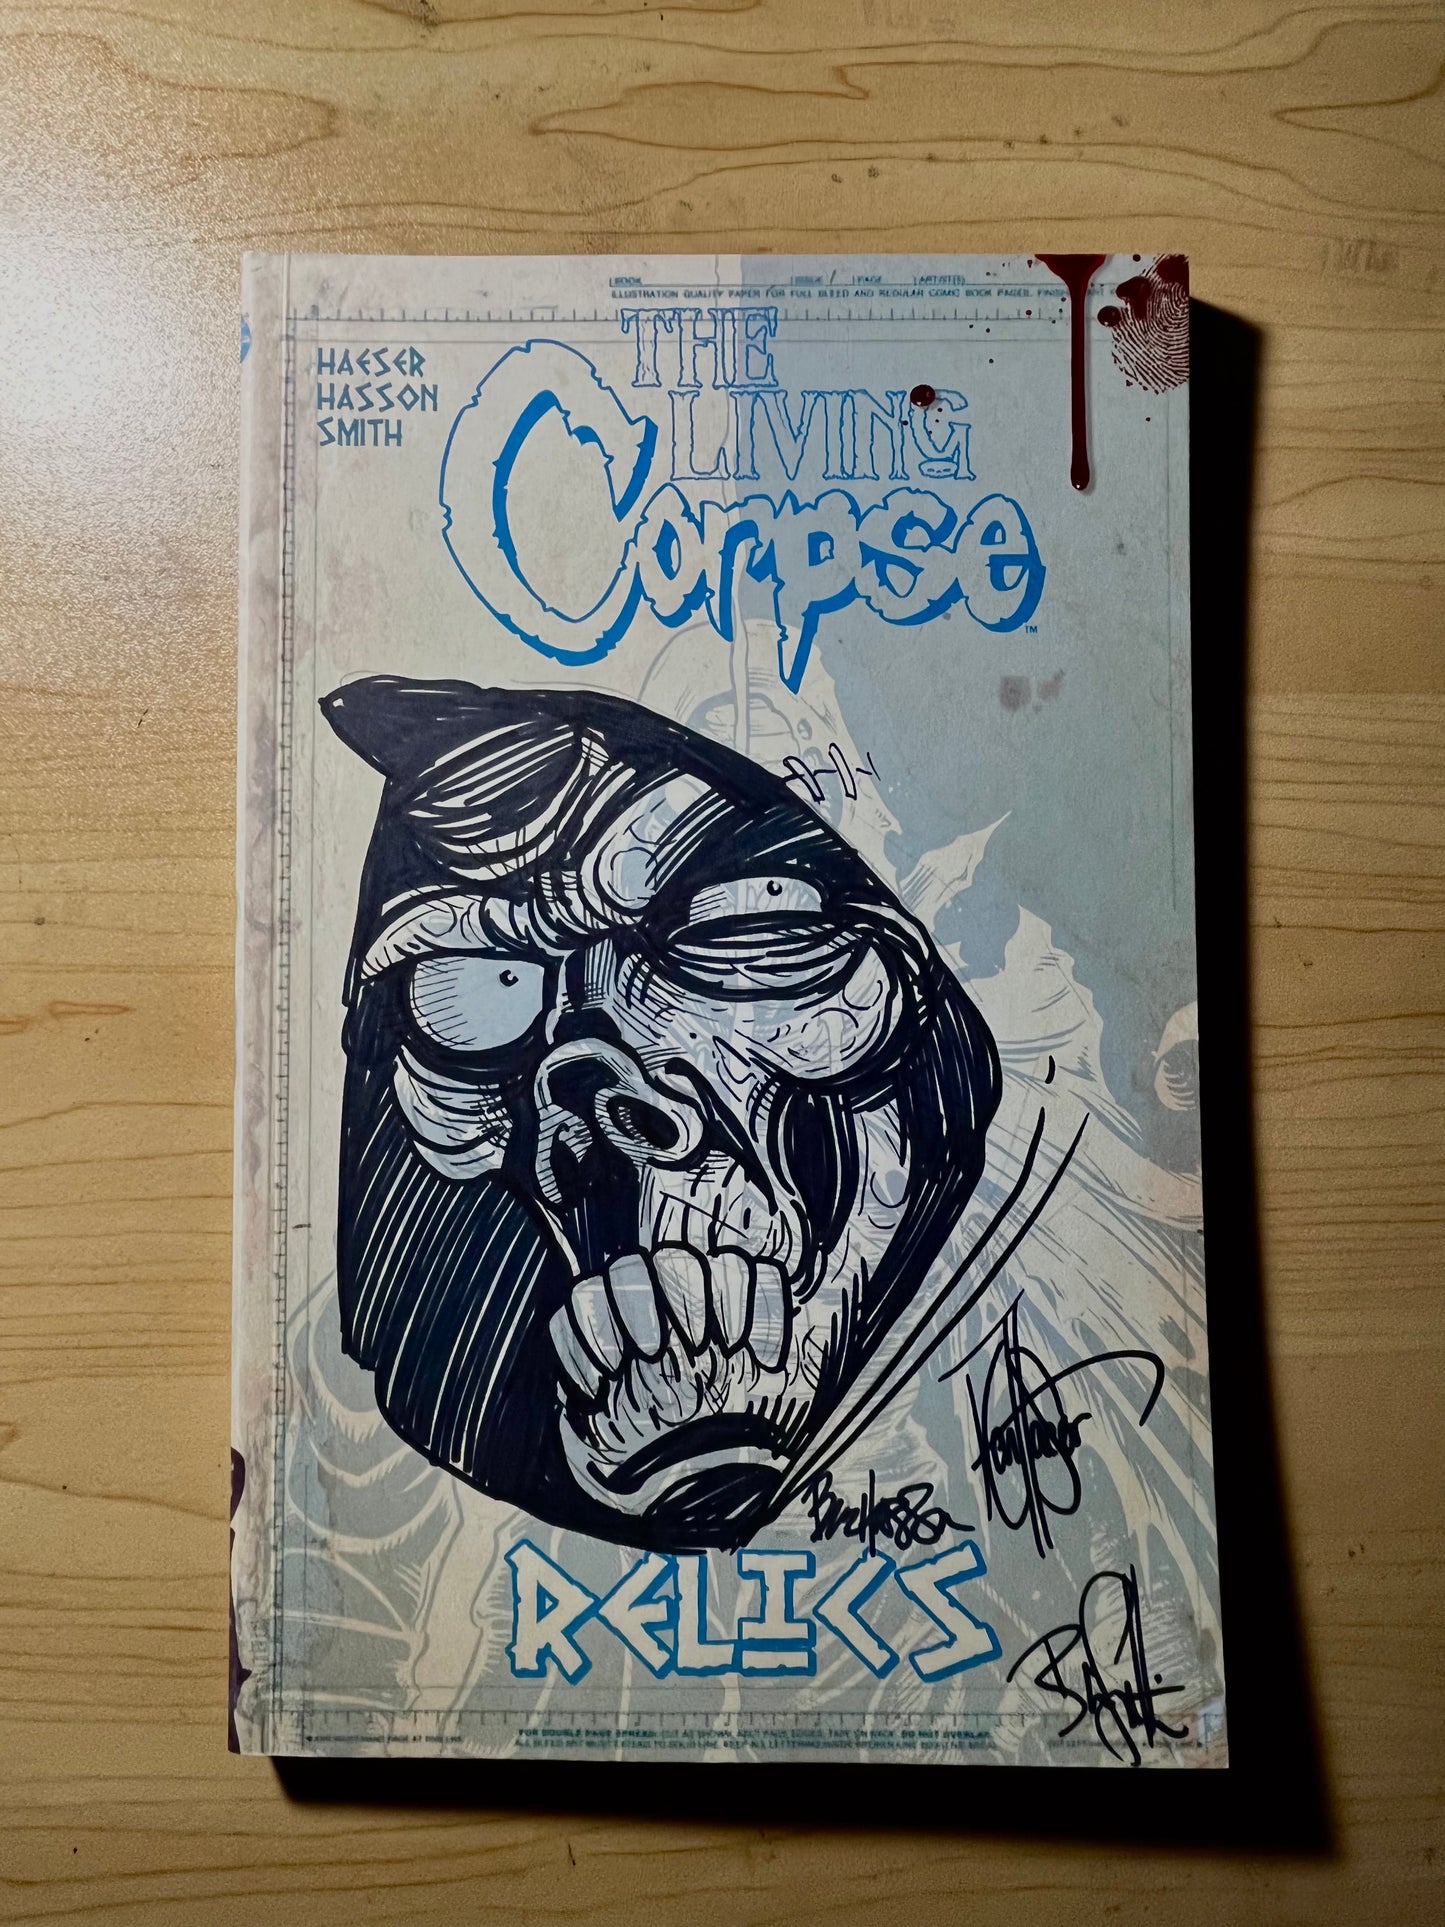 The Living Corpse: Relics (limited print run)